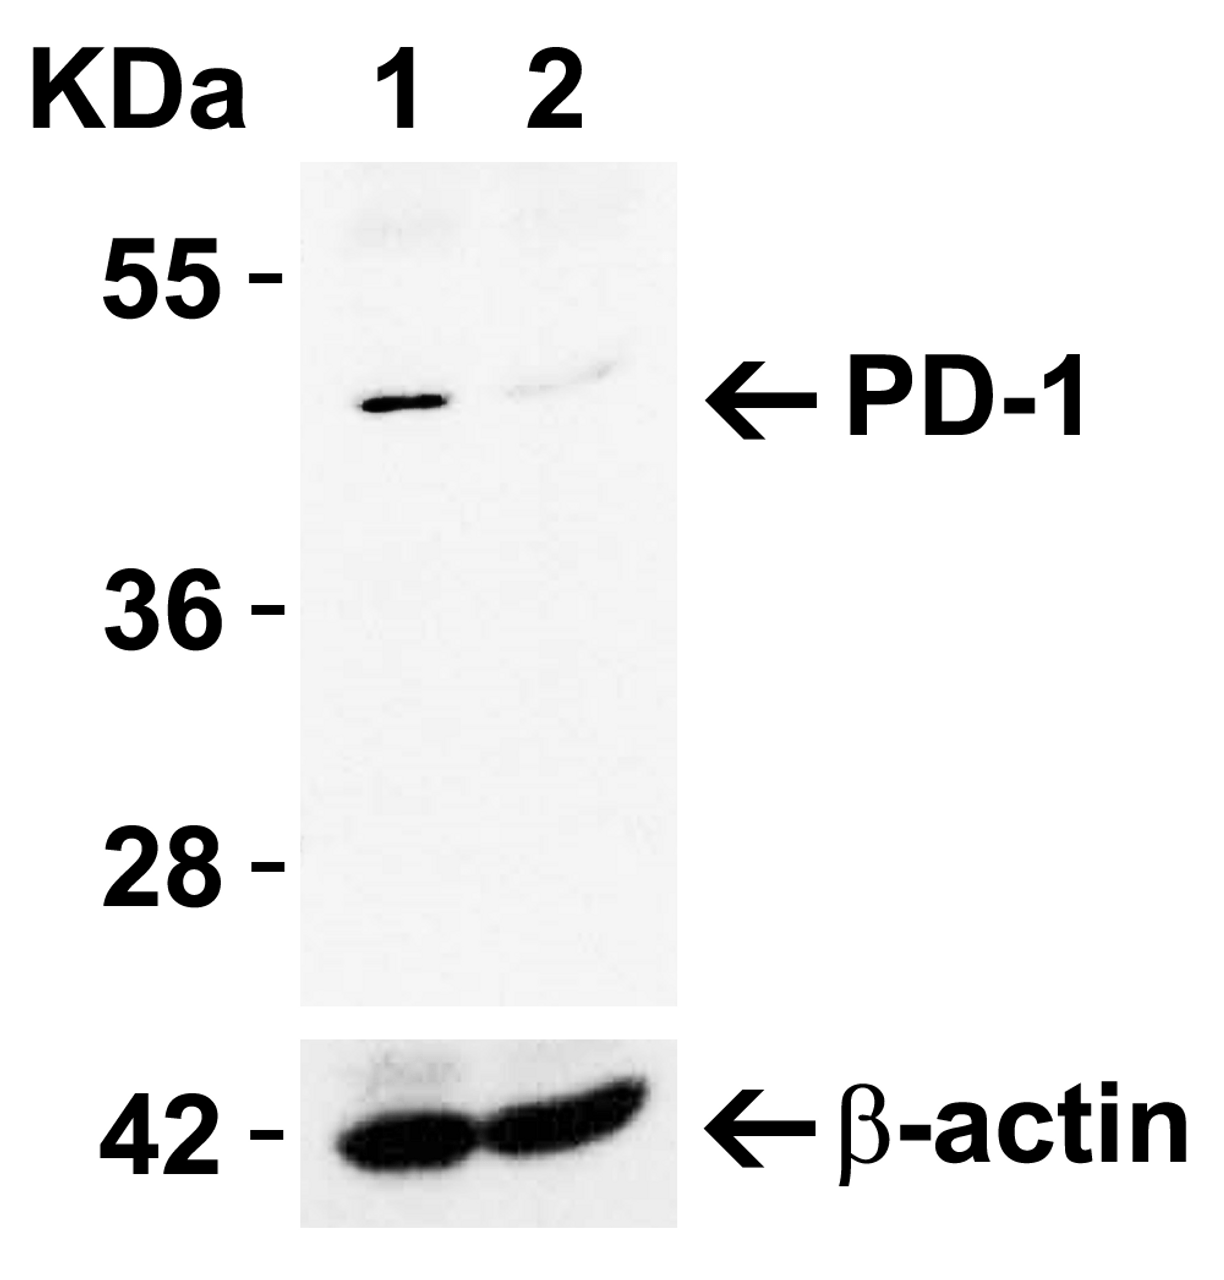 Figure 1 KO Validation in HeLa Cells 
Loading: 10 &#956;g of HeLa WT cell lysates or PD-1 KO cell lysates. Antibodies: PD-1, 4065 (4 &#956;g/mL) and beta-actin 3779 (1 &#956;g/mL) , 1 h incubation at RT in 5% NFDM/TBST.
Secondary: Goat Anti-Rabbit IgG HRP conjugate at 1:10000 dilution.